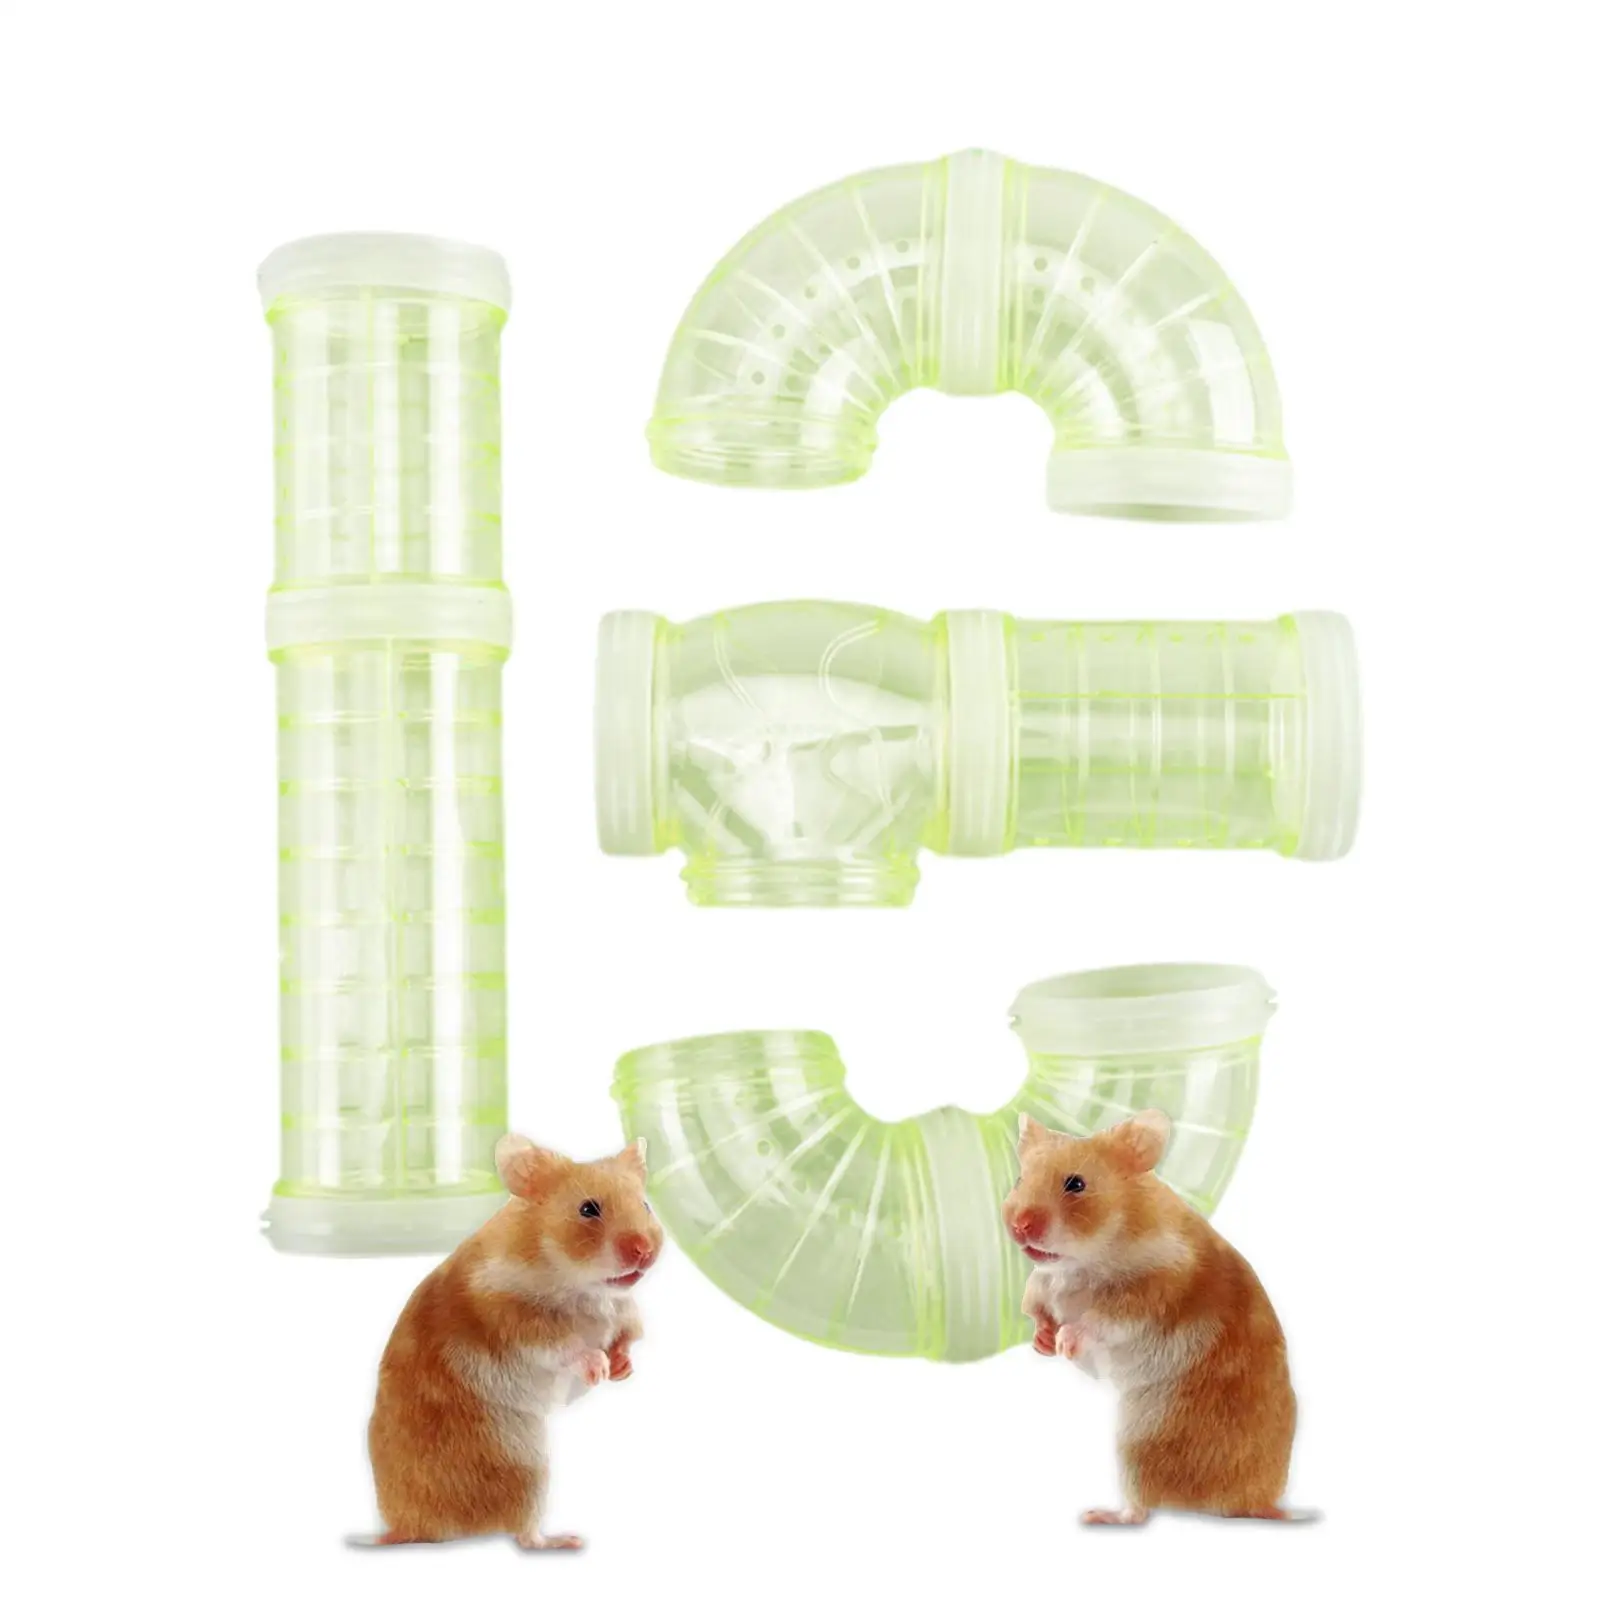 Hamster Tube Set, Hamster Toy Playground Pipe Tunnel for Hamster, Mice